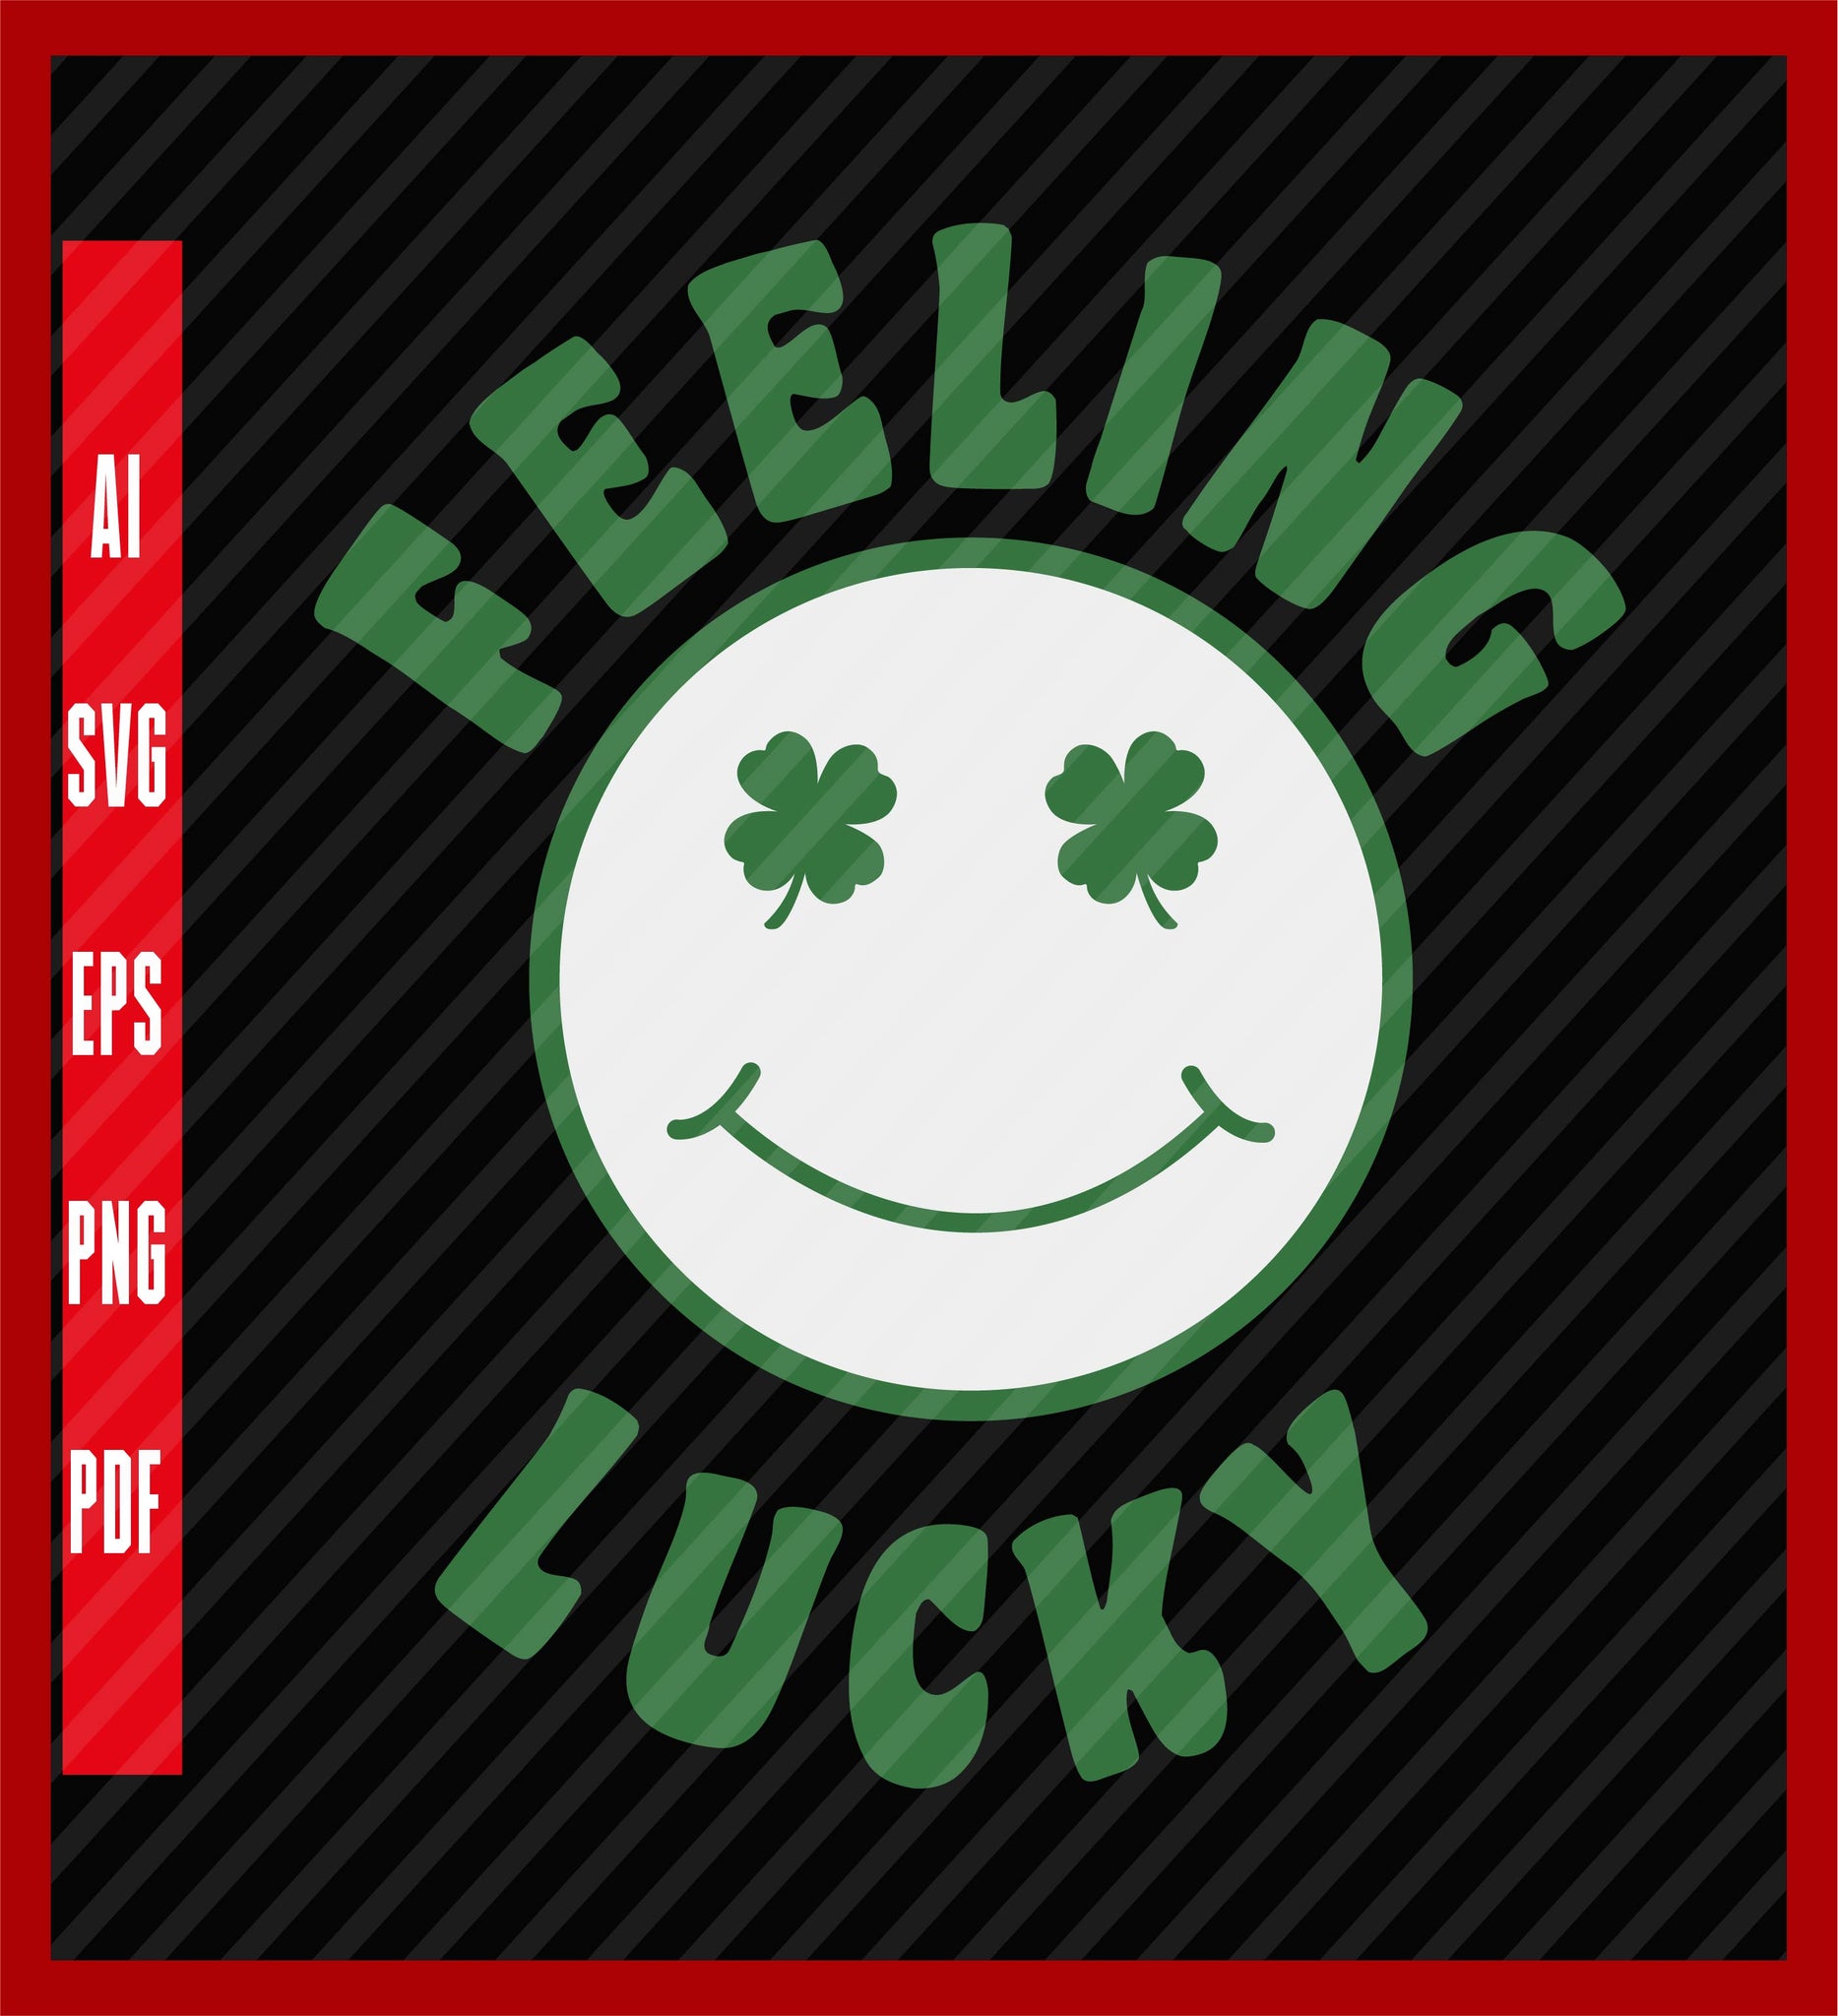 Feeling Lucky Shirt, St Patrick's Day Shirt For Women, Feeling Lucky Tshirt, Retro Lucky Shirt, Saint Patrick's Day Shirts Design Eps, Ai, Png, Svg and Pdf Printable Files